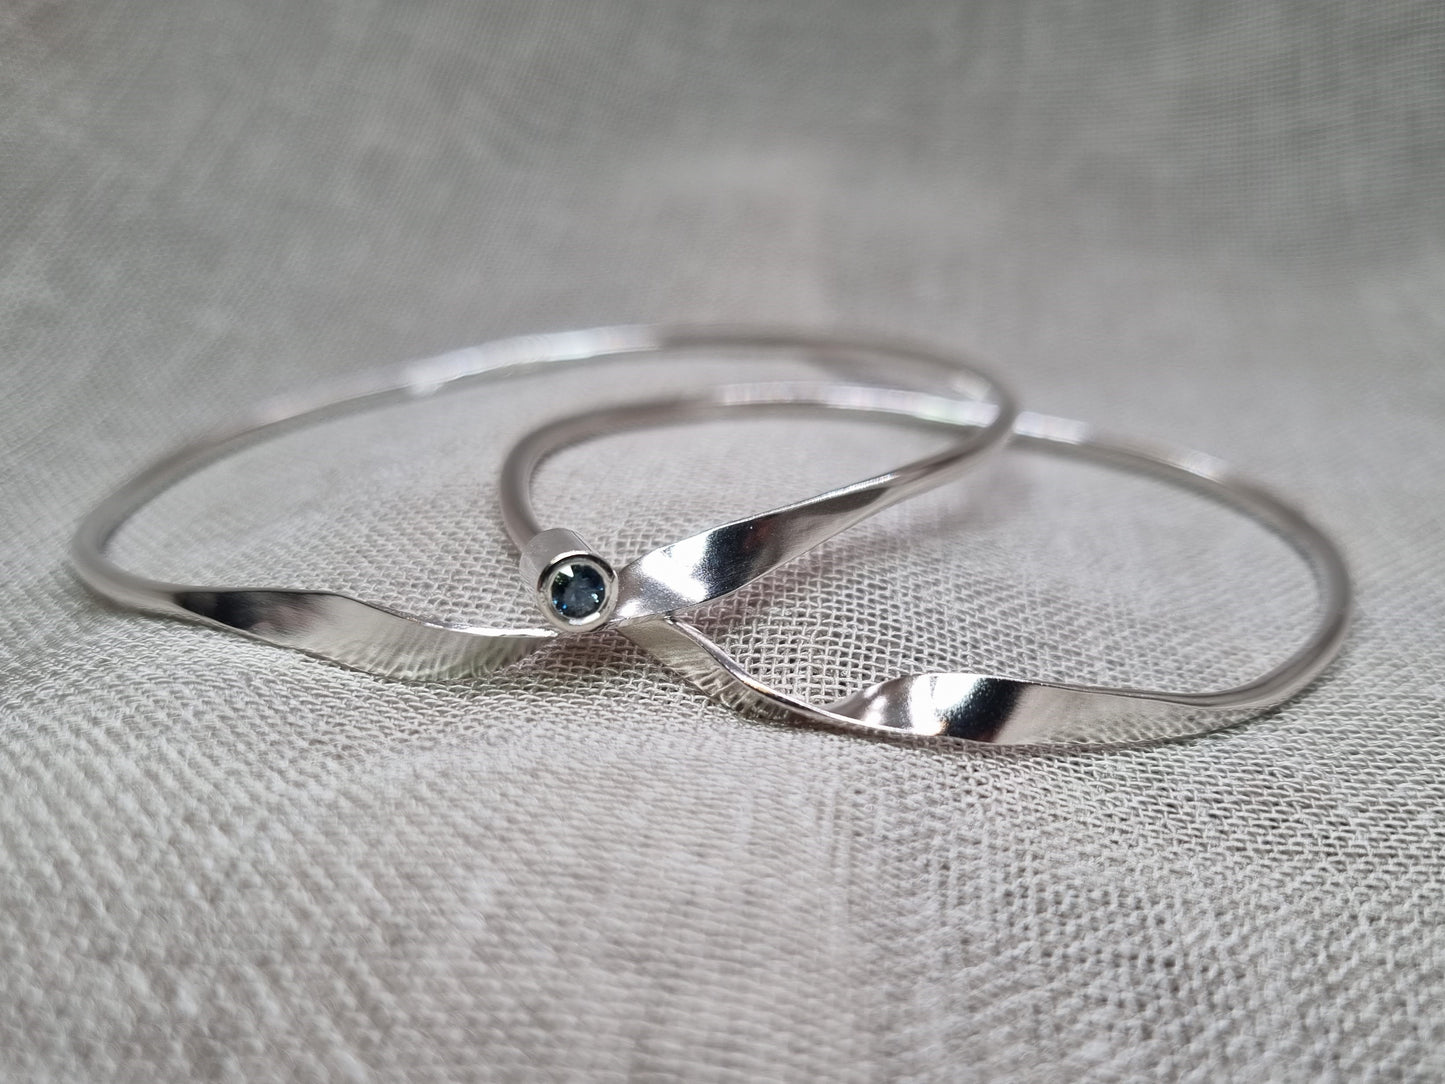 Hybrid MOBIUS Bangle - Teal Sapphire - Sterling Silver